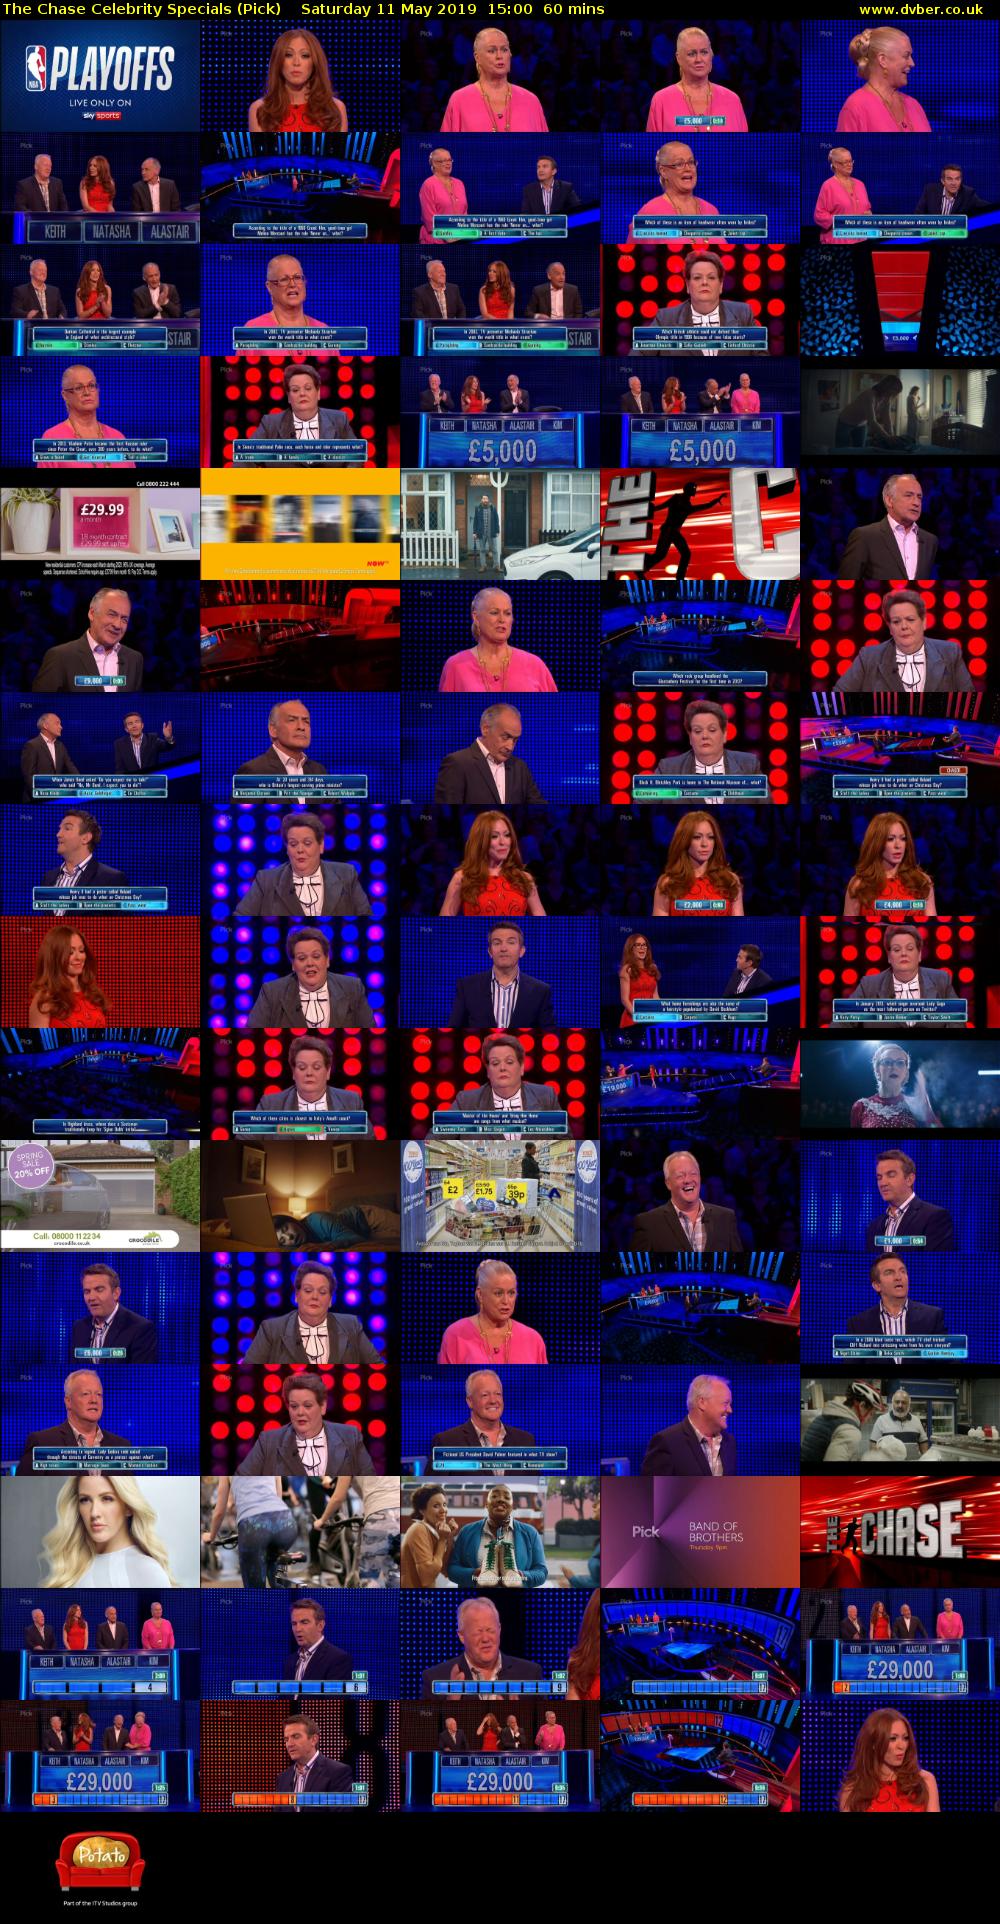 The Chase Celebrity Specials (Pick) Saturday 11 May 2019 15:00 - 16:00